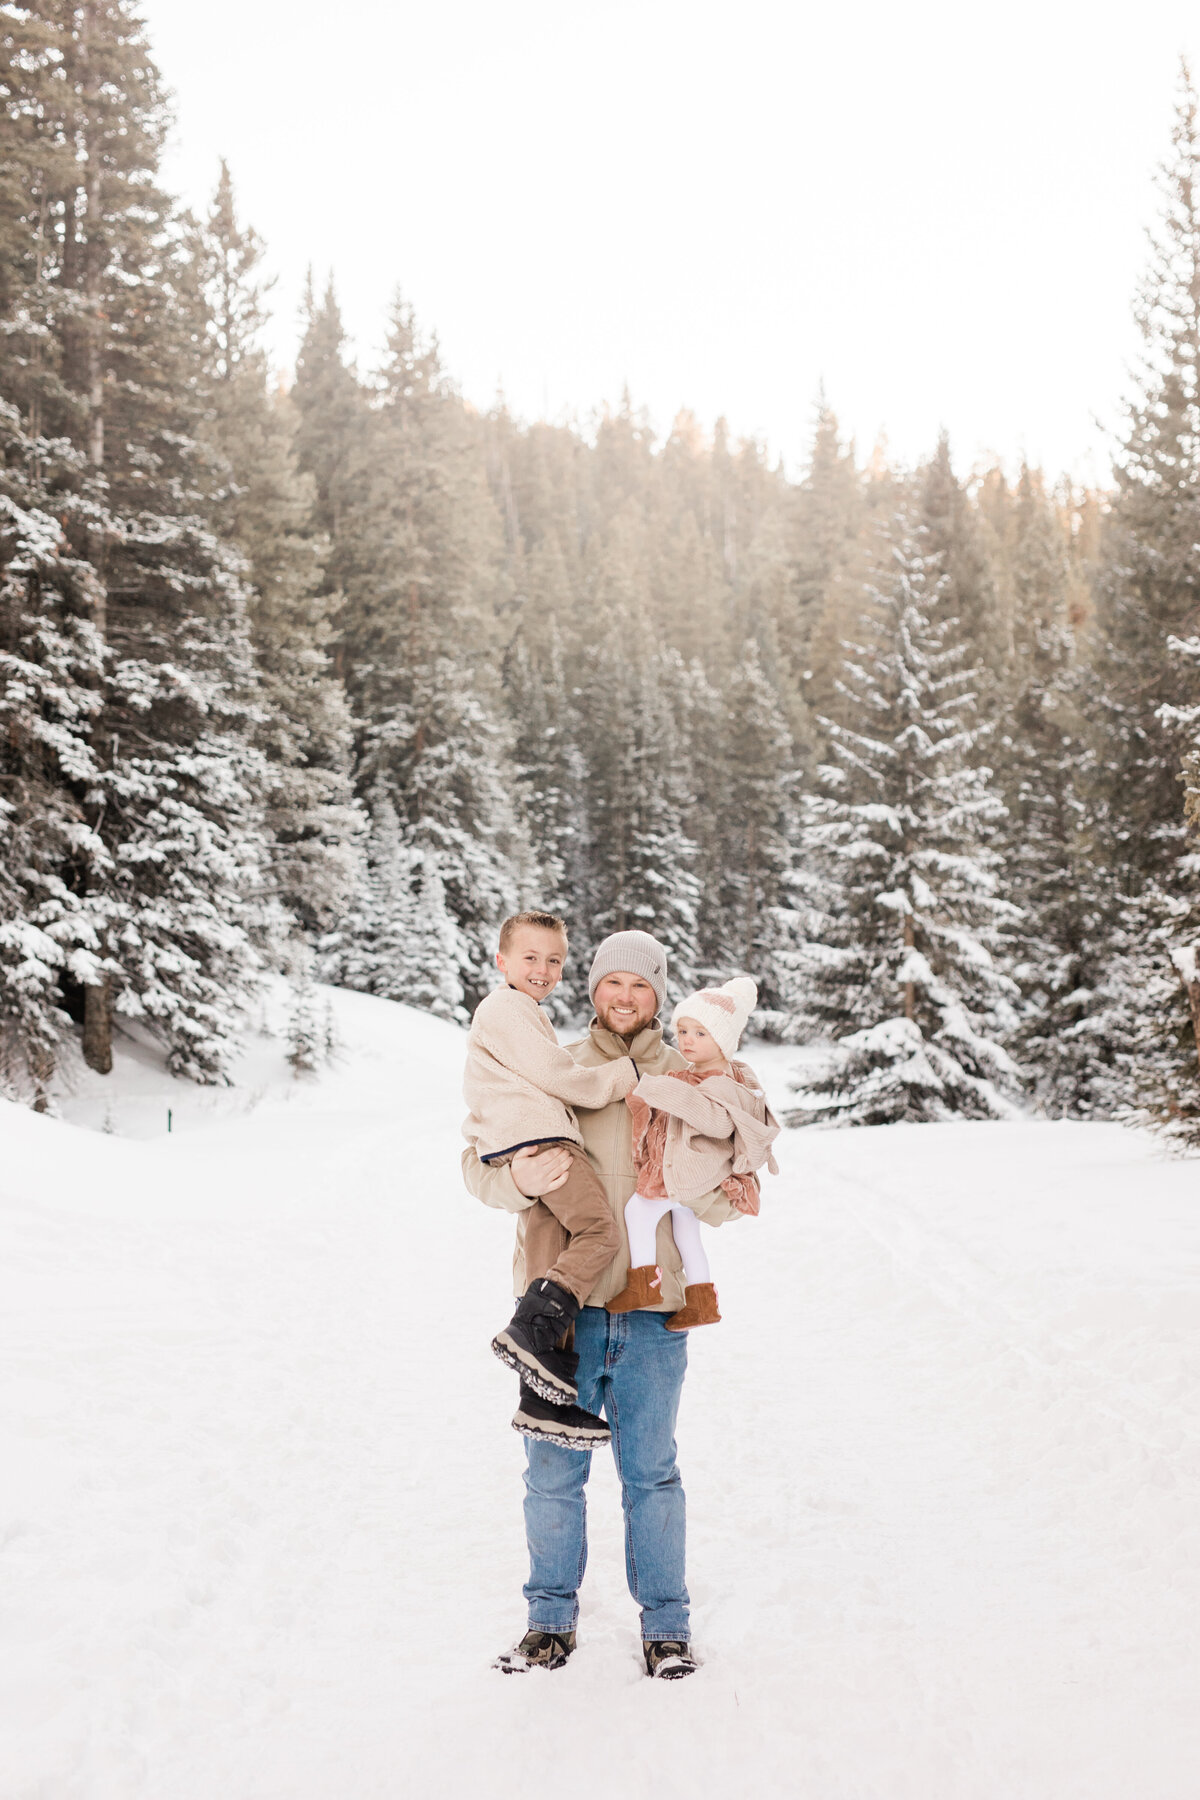 This dad hold two kids in his arms amidst a snowy winter landscape